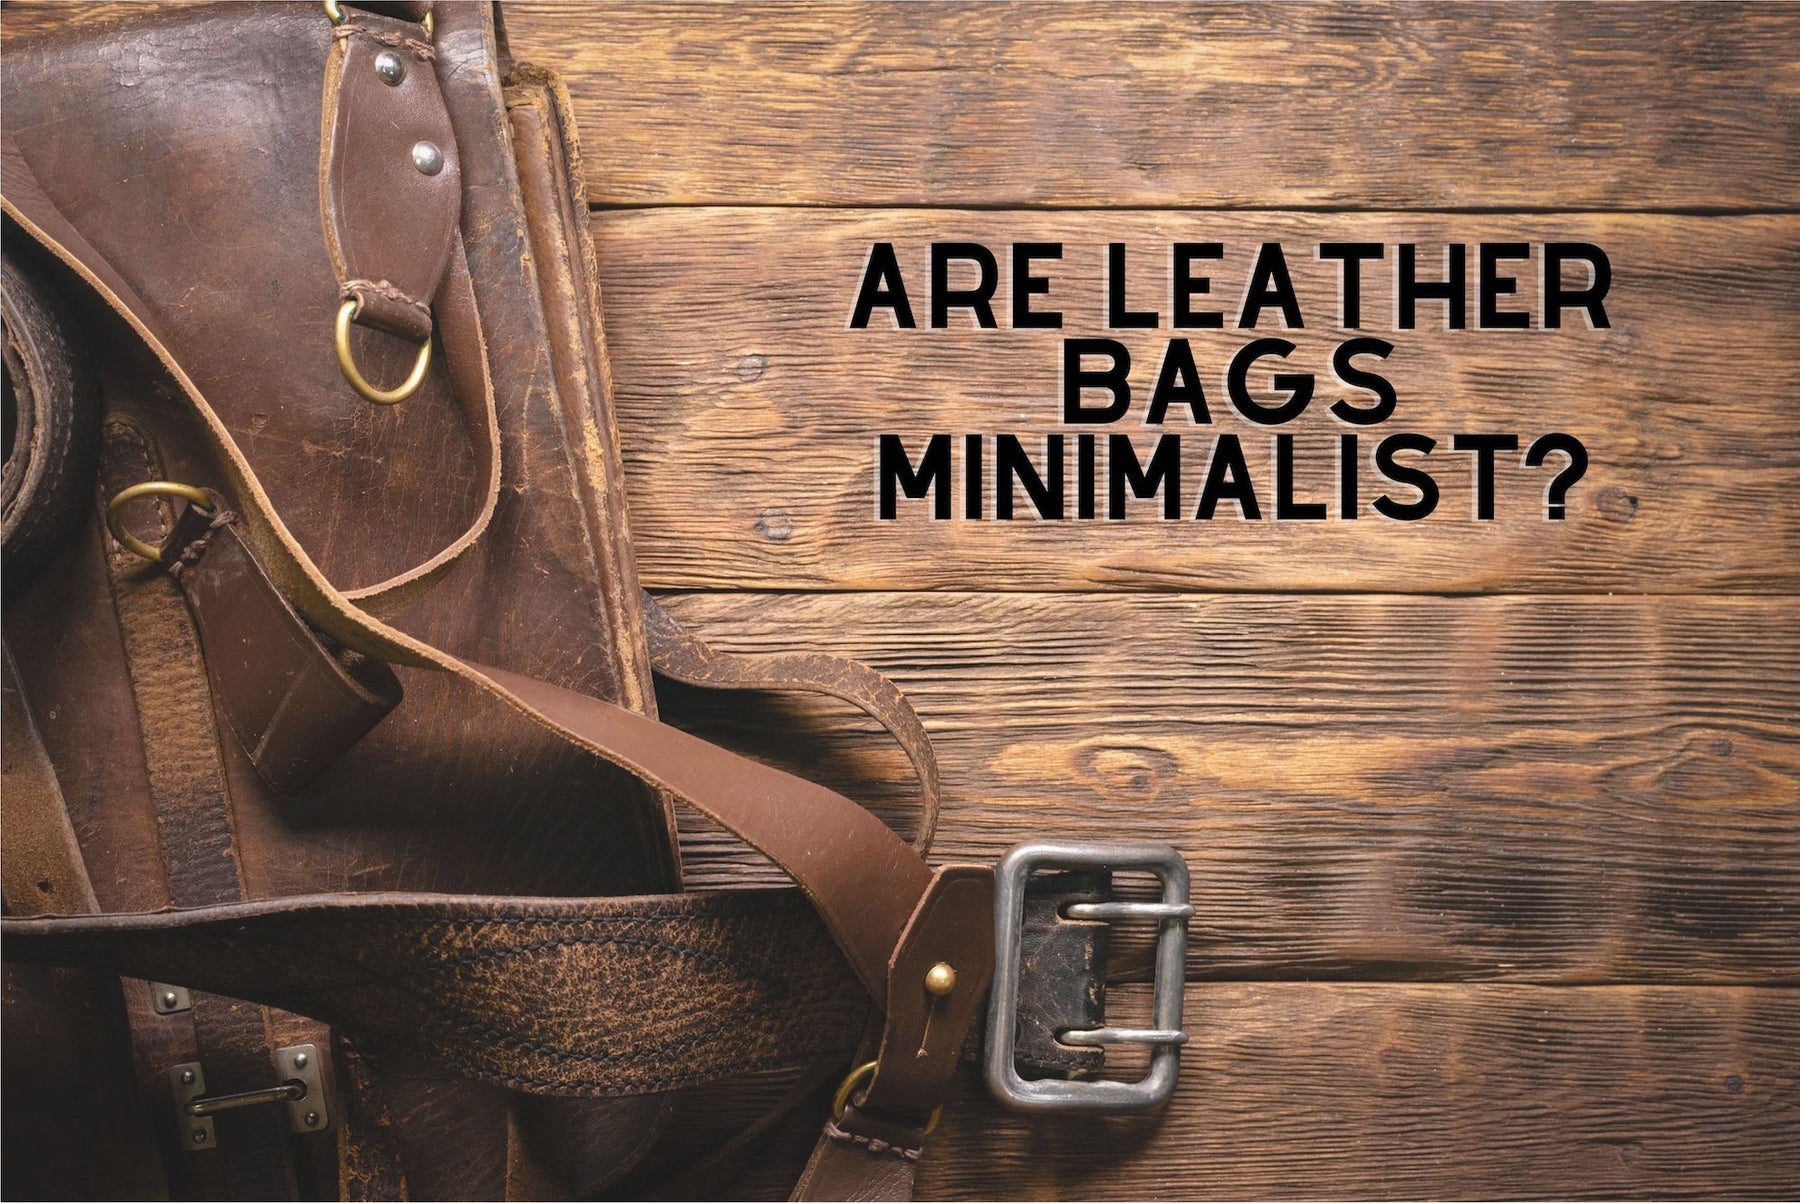 Why Are Genuine Leather Bags Minimalistic? - The Handmade Store